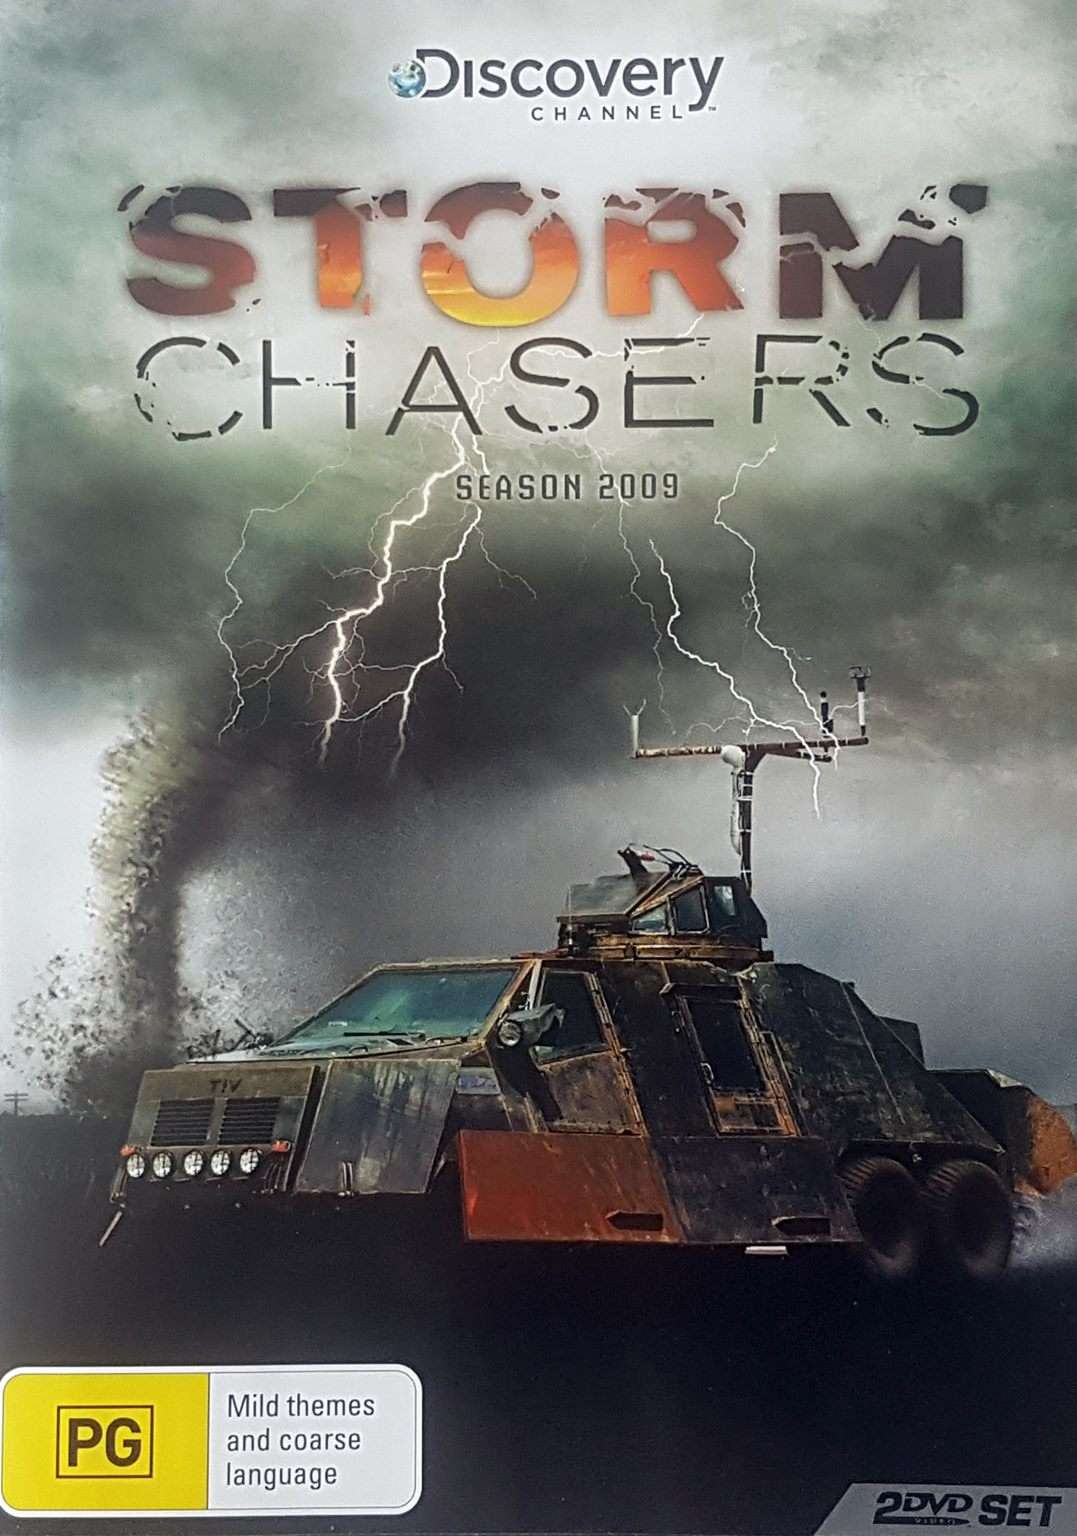 Storm Chasers Season 2009